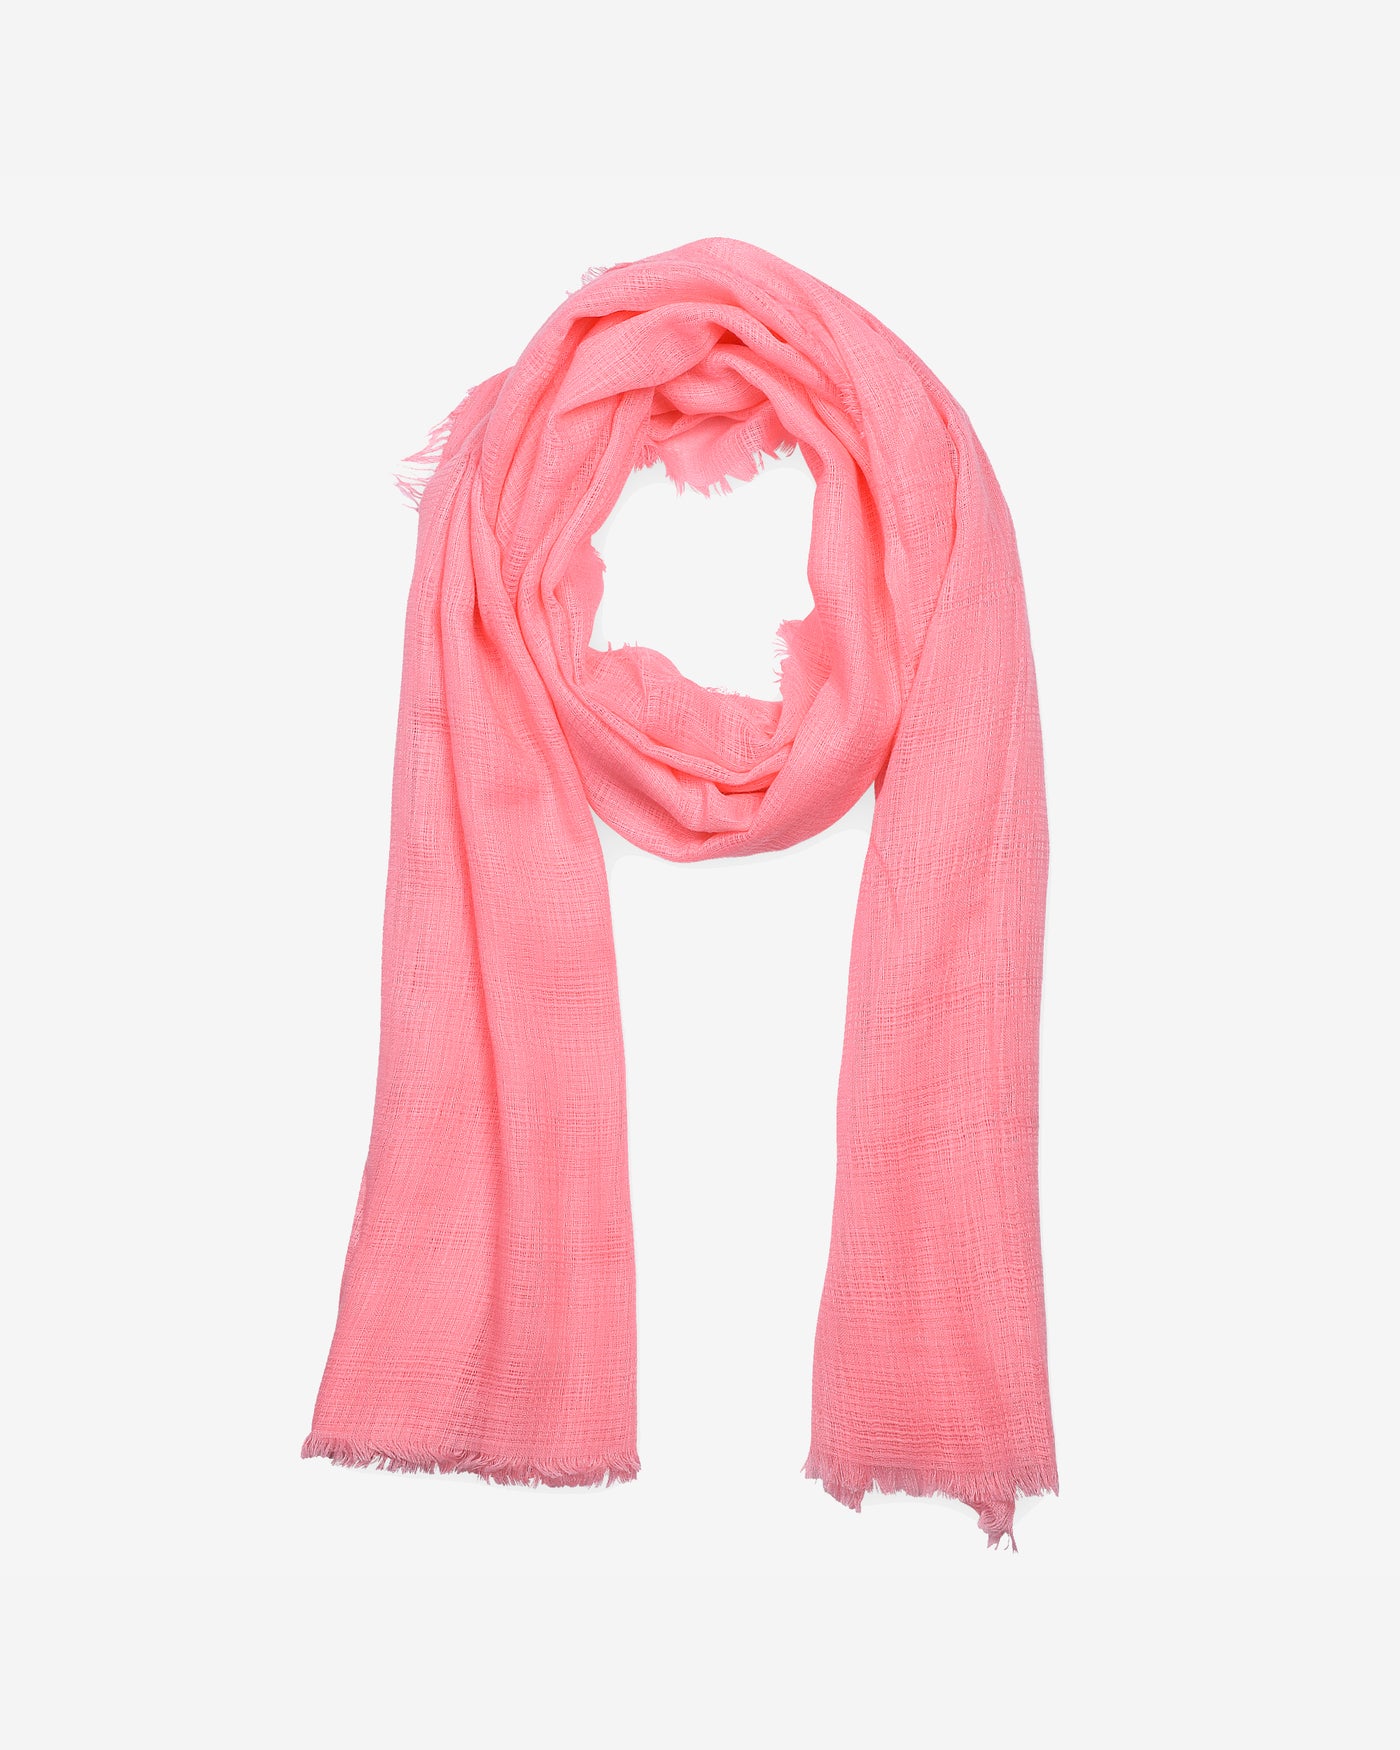 Lightweight Scarf - Coral Summer Scarves Joey James, The Label   